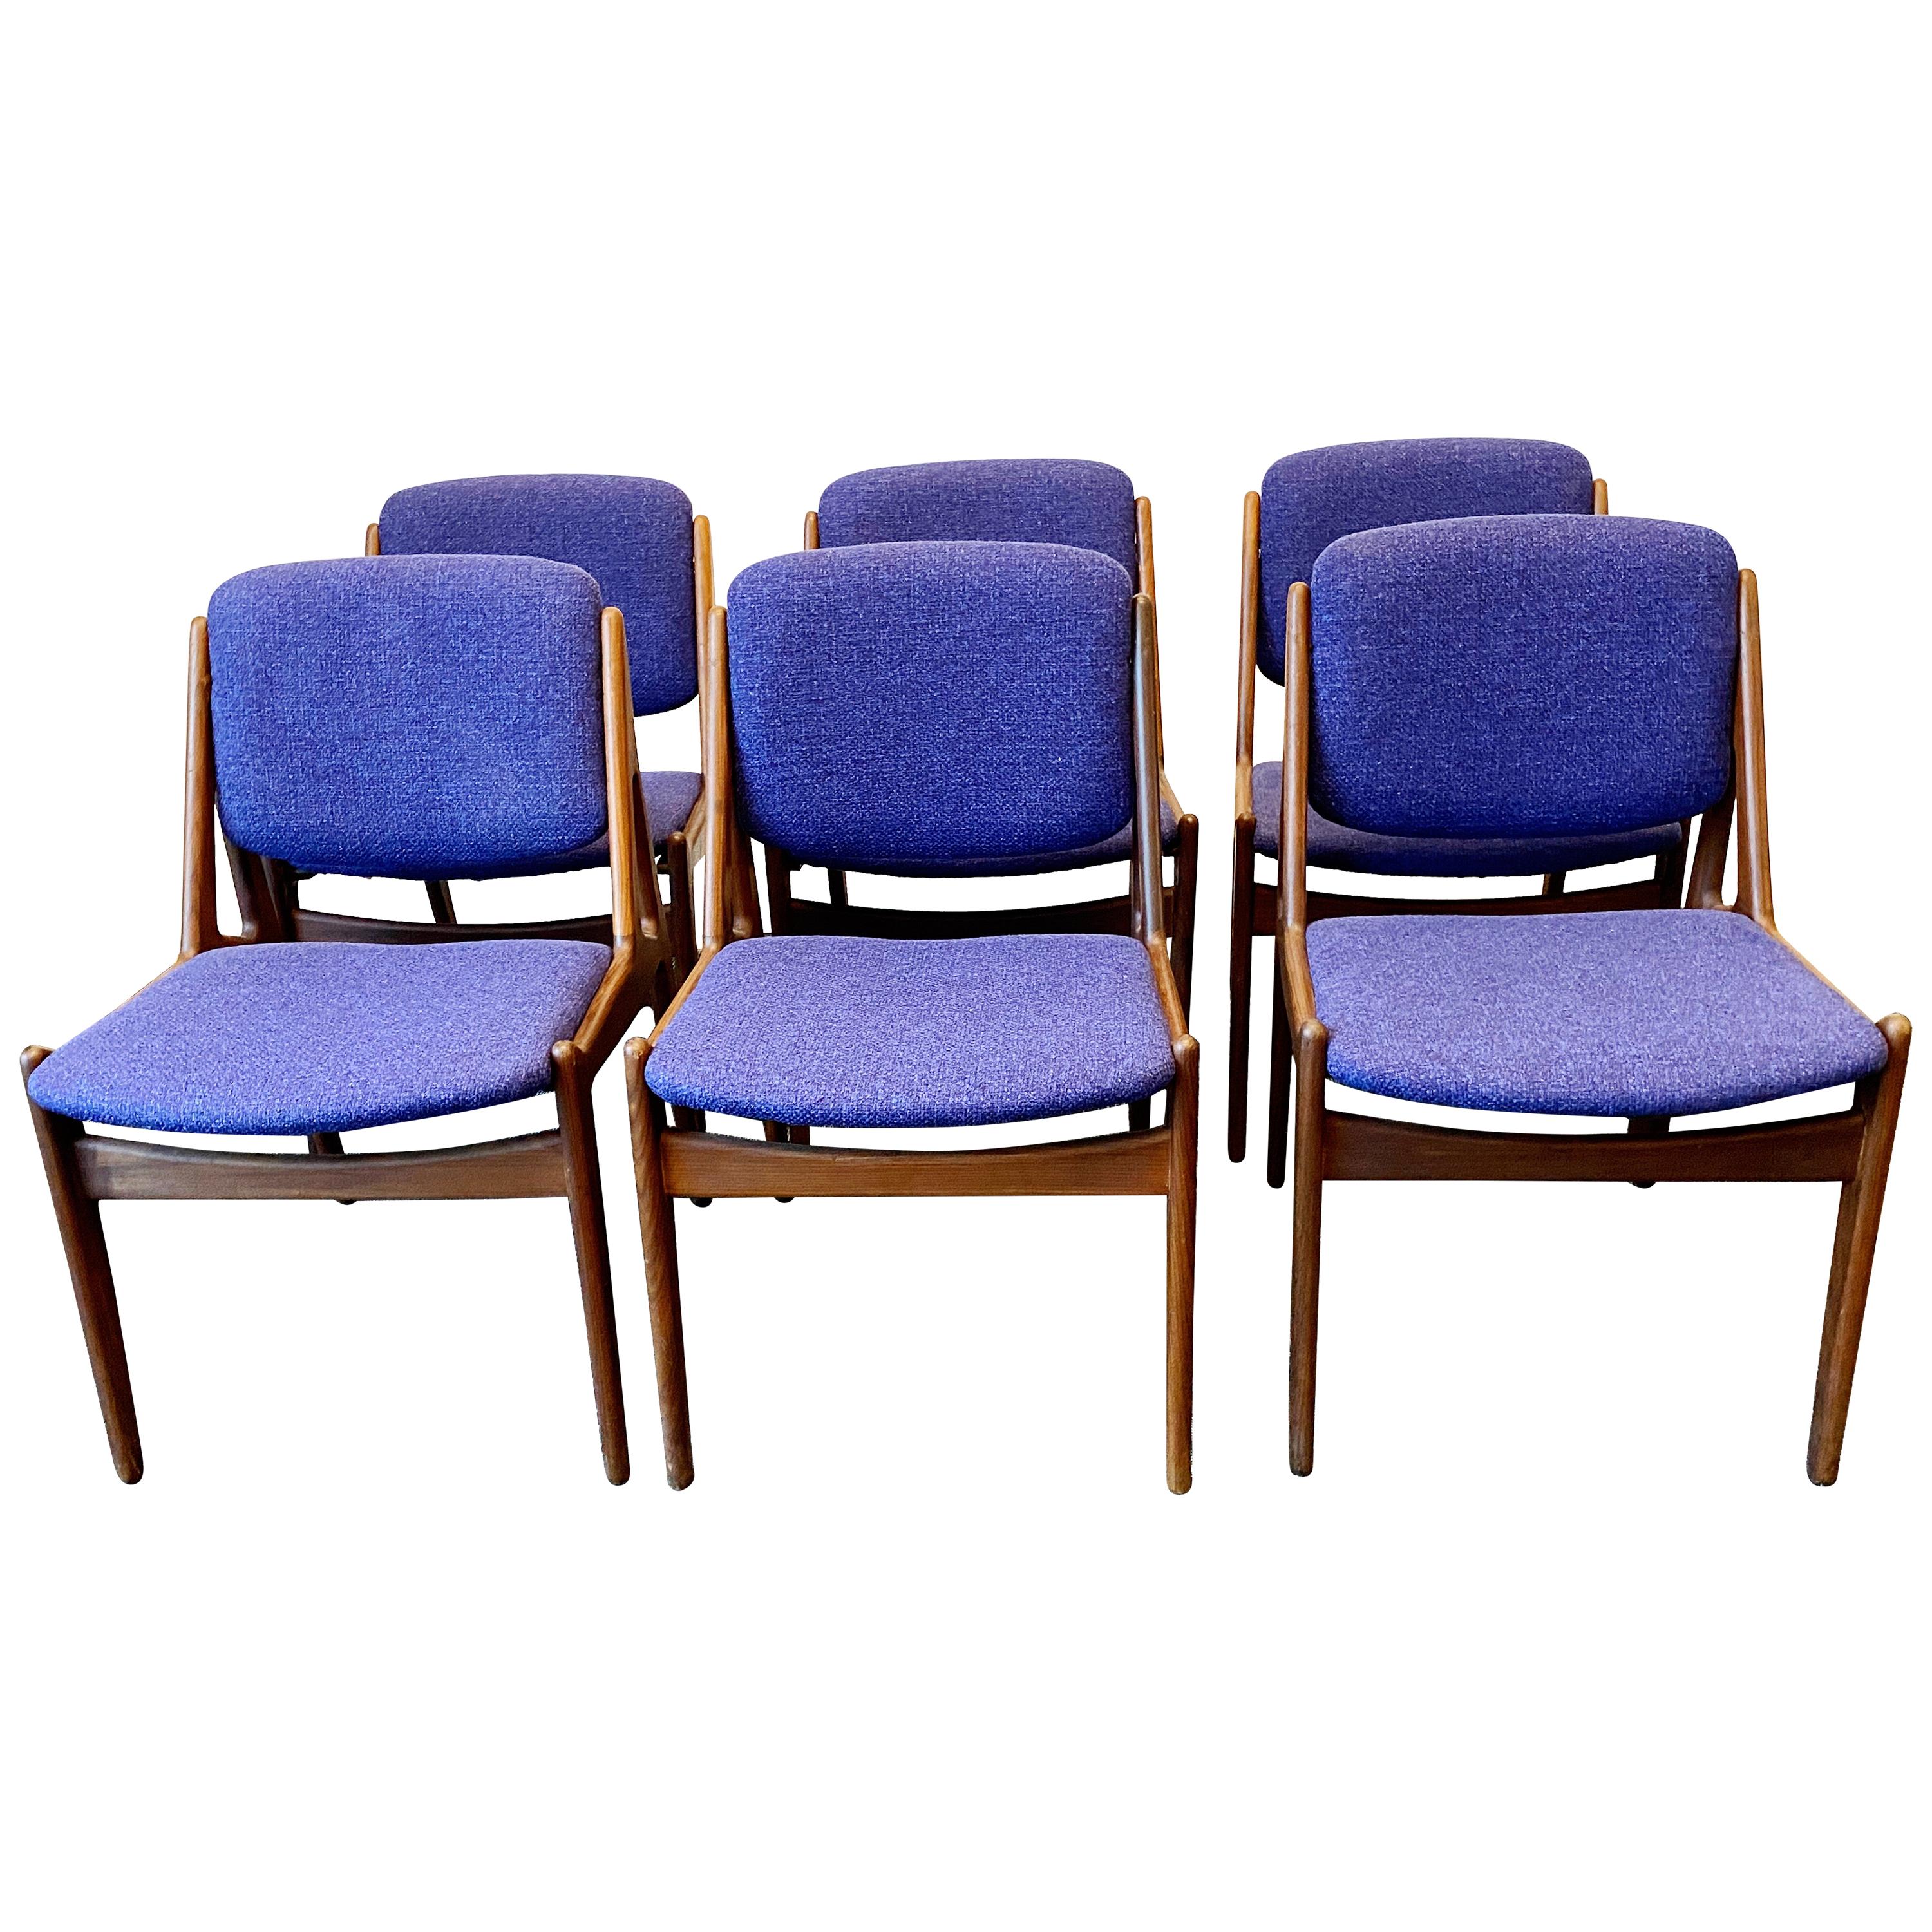 Vintage Set of Six Danish Modern Dining Chairs by Arne Vodder, circa 1960s